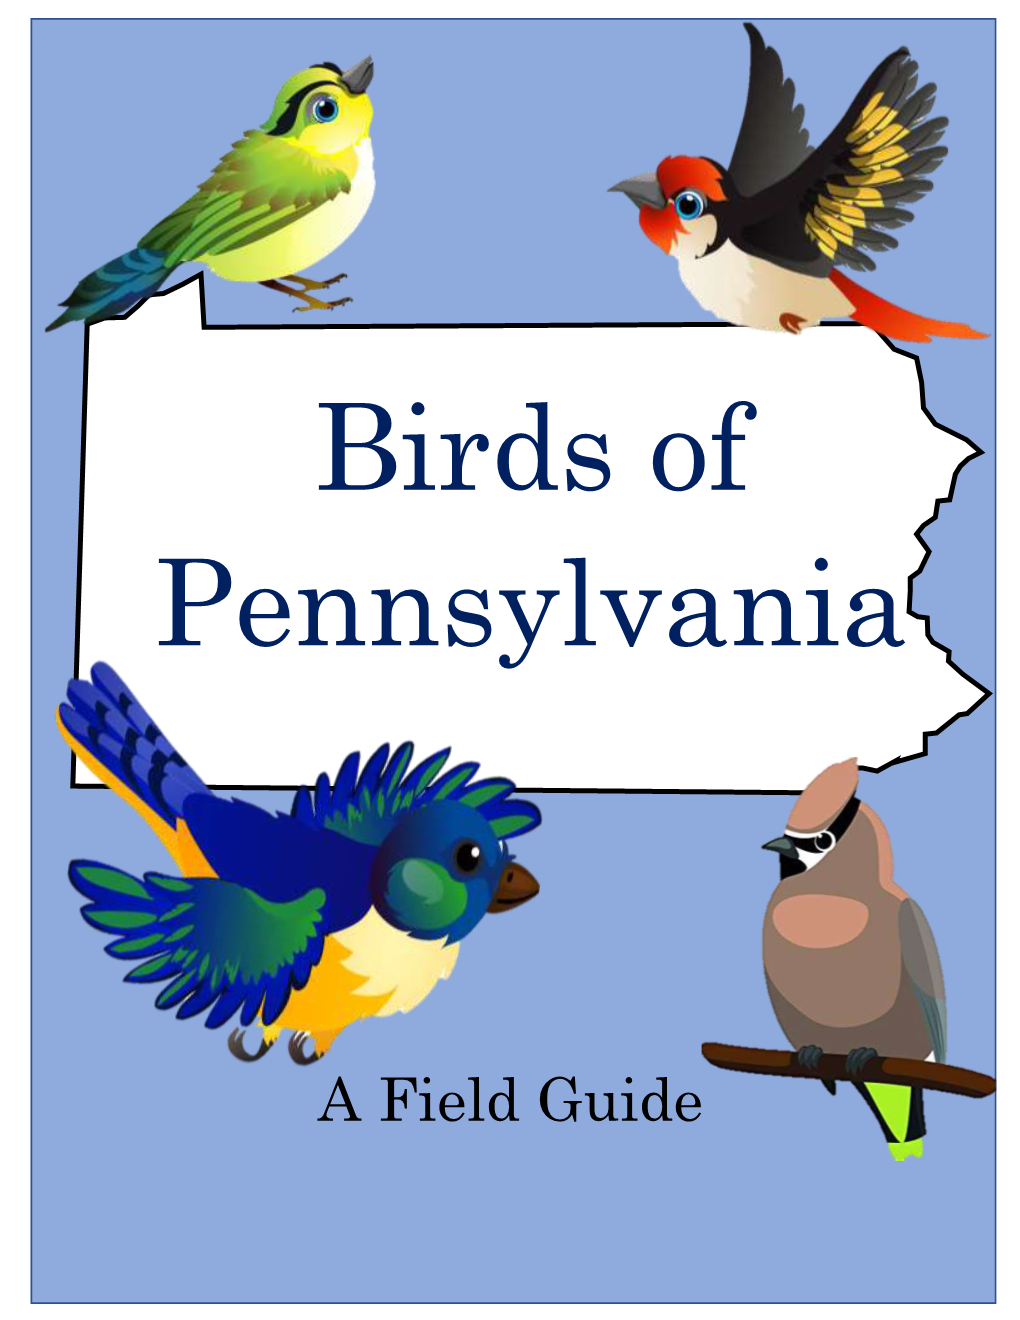 A Field Guide Introduction Welcome! As Avid Birders from Penn State University, We Are Happy You Have an Interest in Learning More About Birds